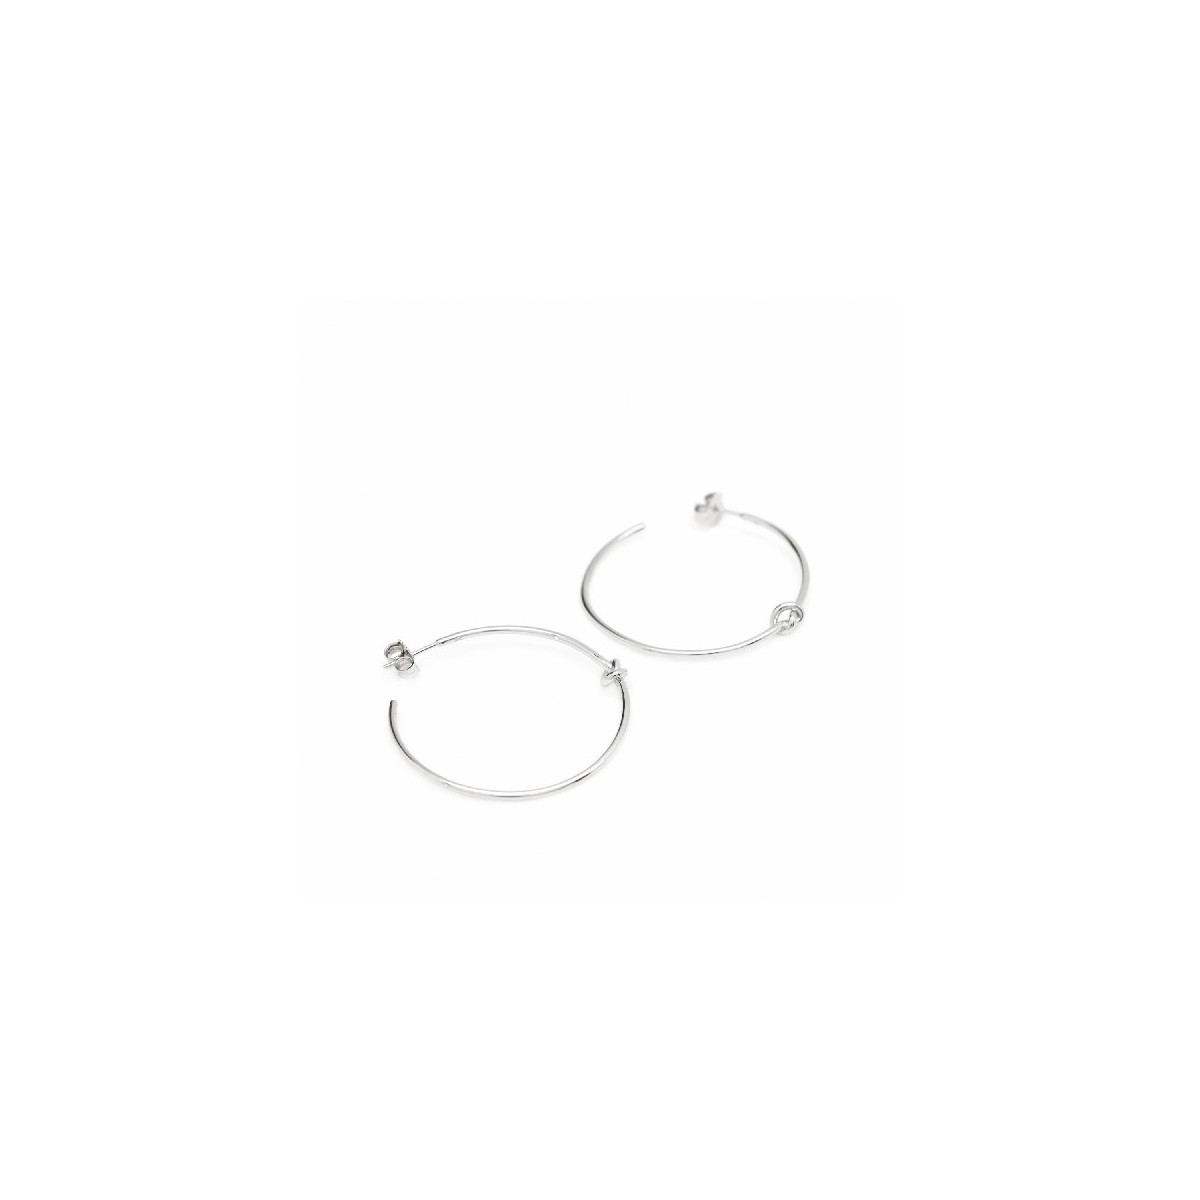 KNOT LINEARGENT EARRING - 17196-W-A